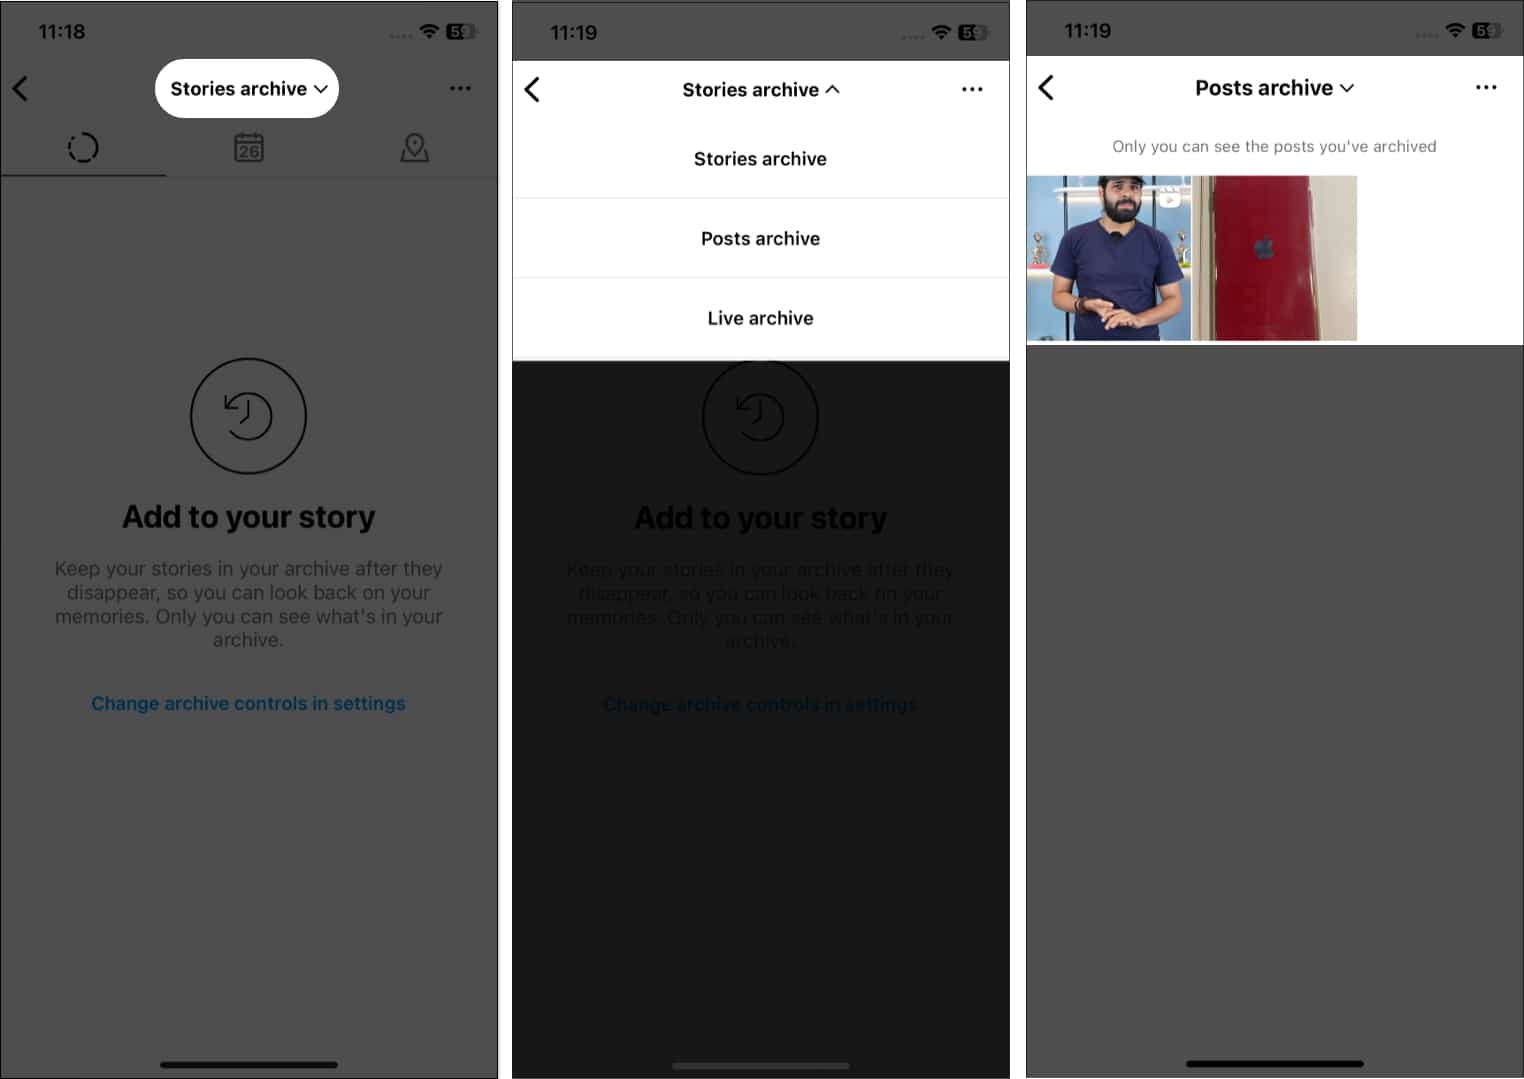 Find archived stories and posts on Instagram